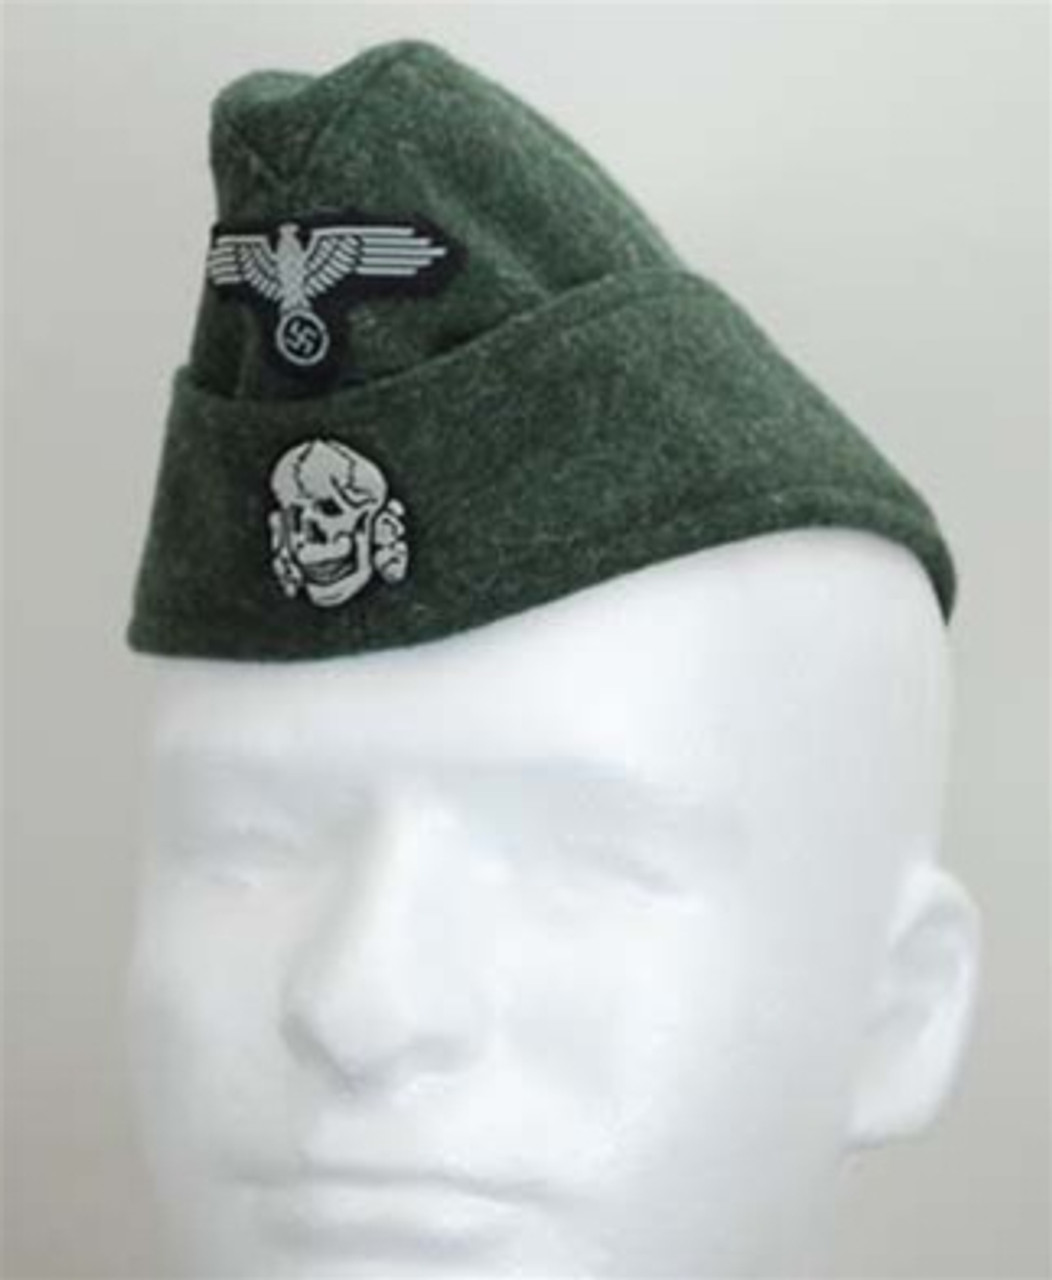 Waffen SS Enlisted M40 Field cap from Hessen Antique